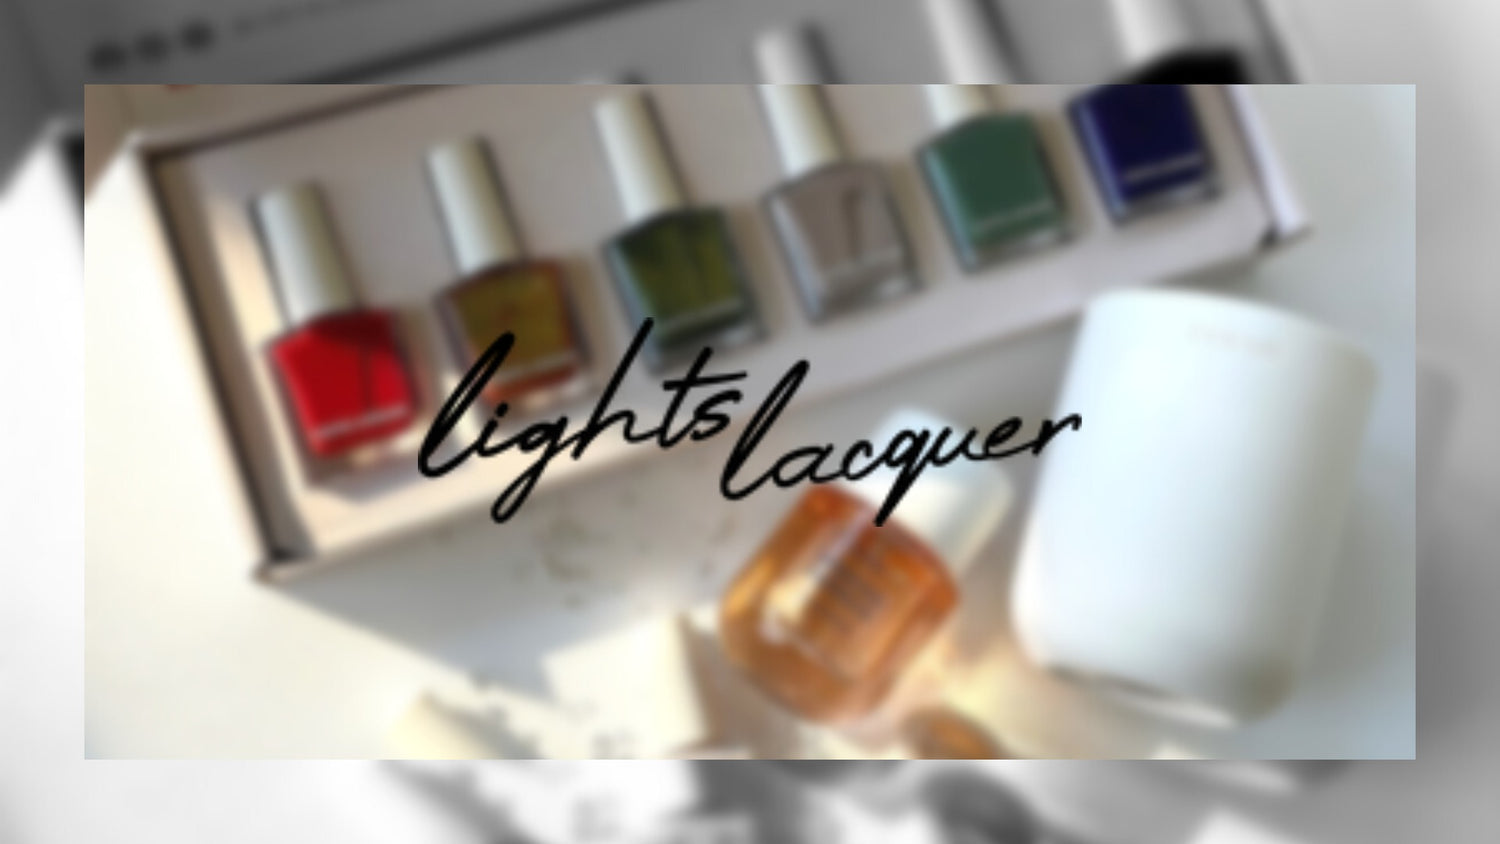 Lights Lacquer